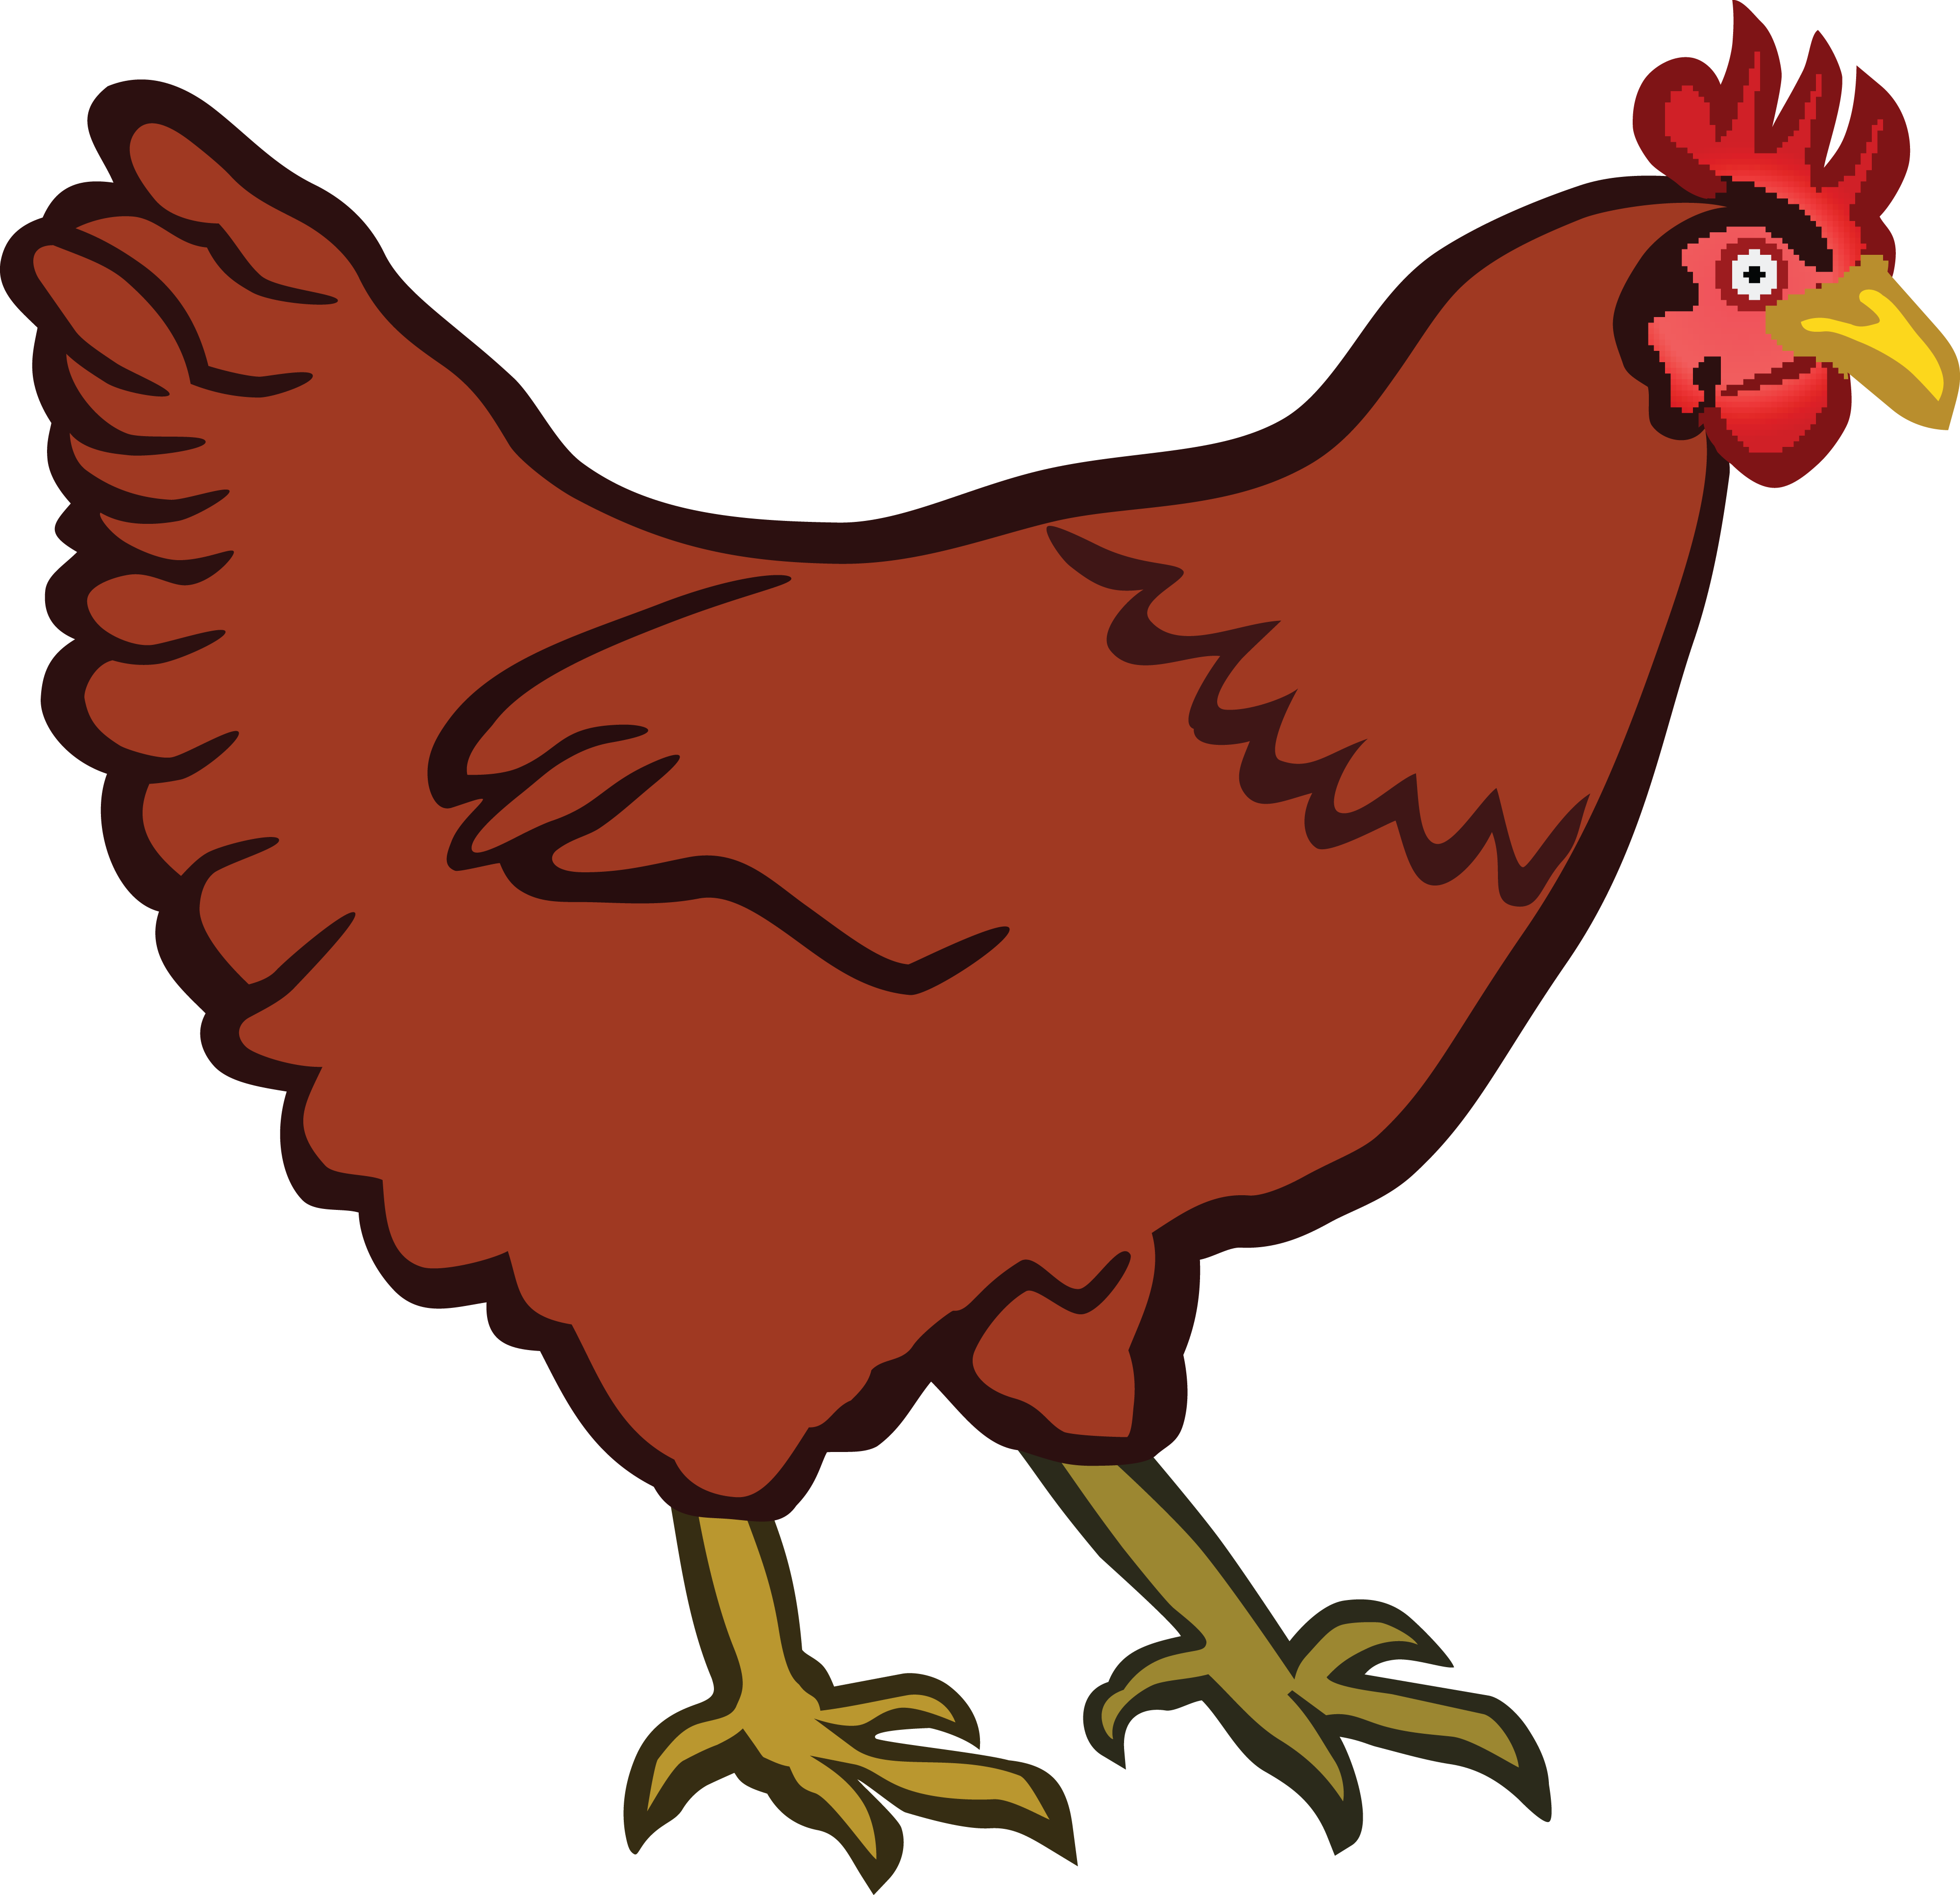 Fat clipart chicken logo Fat chicken logo Transparent FREE for download on WebStockReview 2021